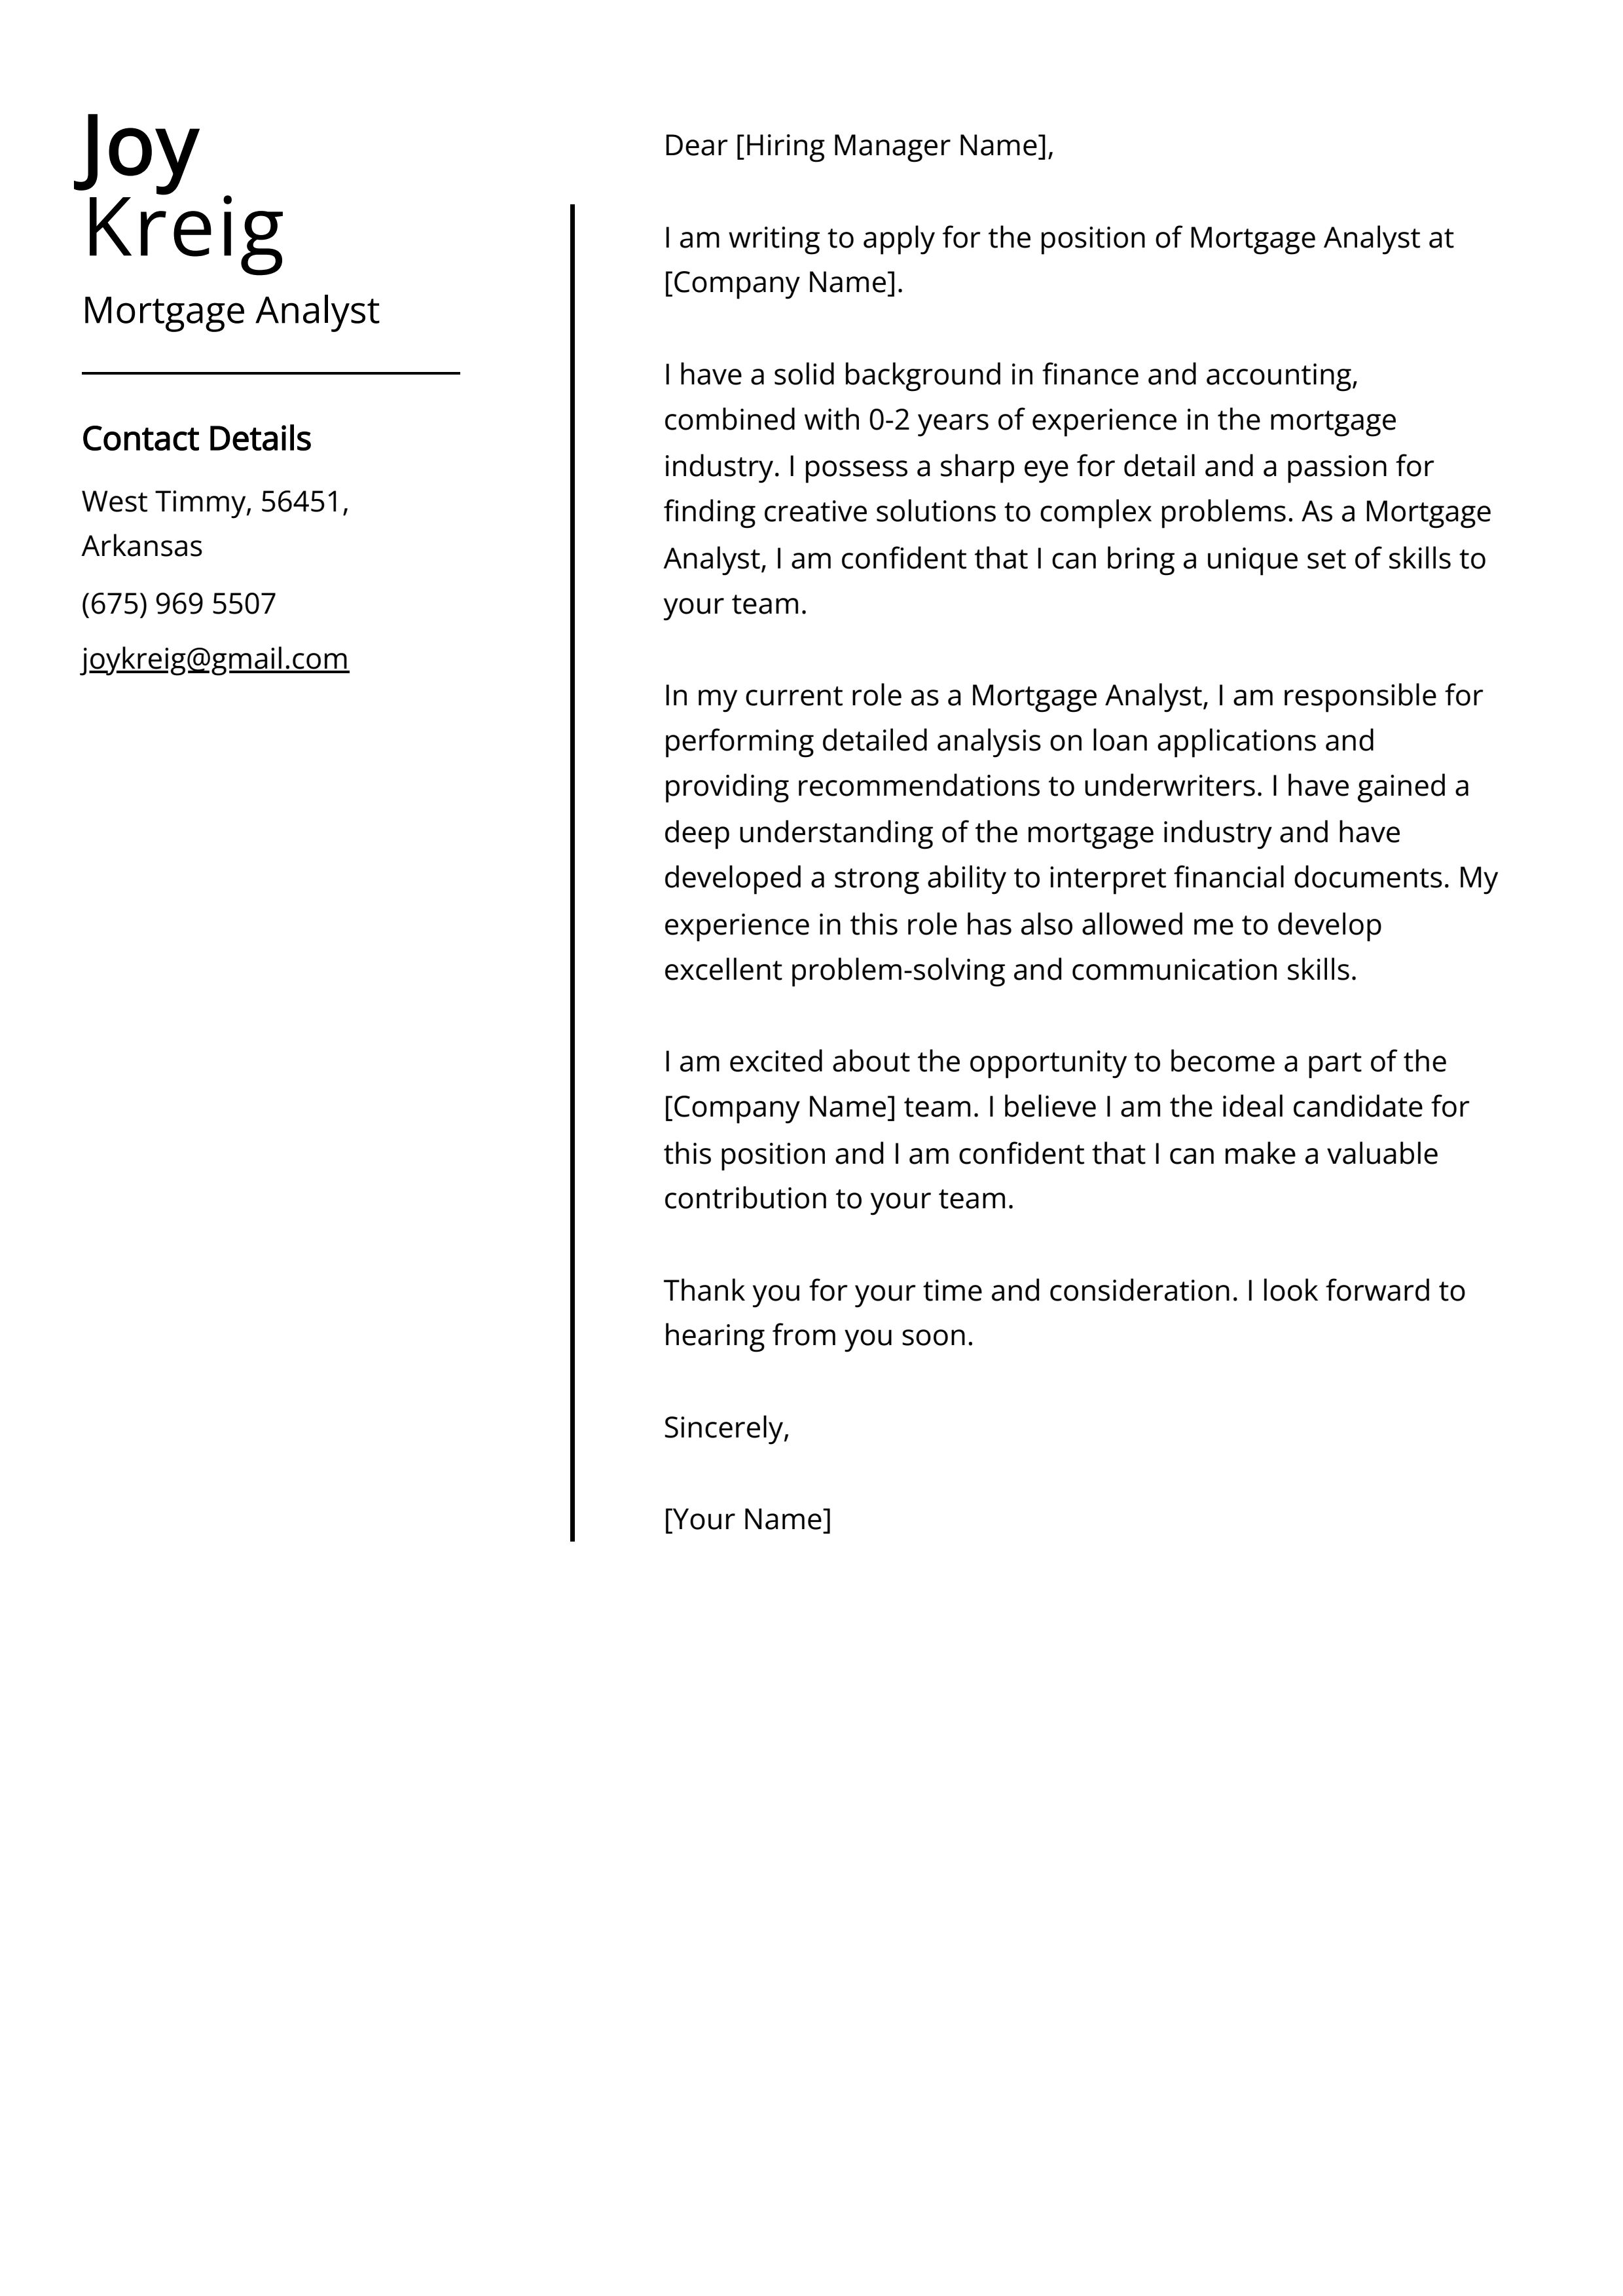 Mortgage Analyst Cover Letter Example